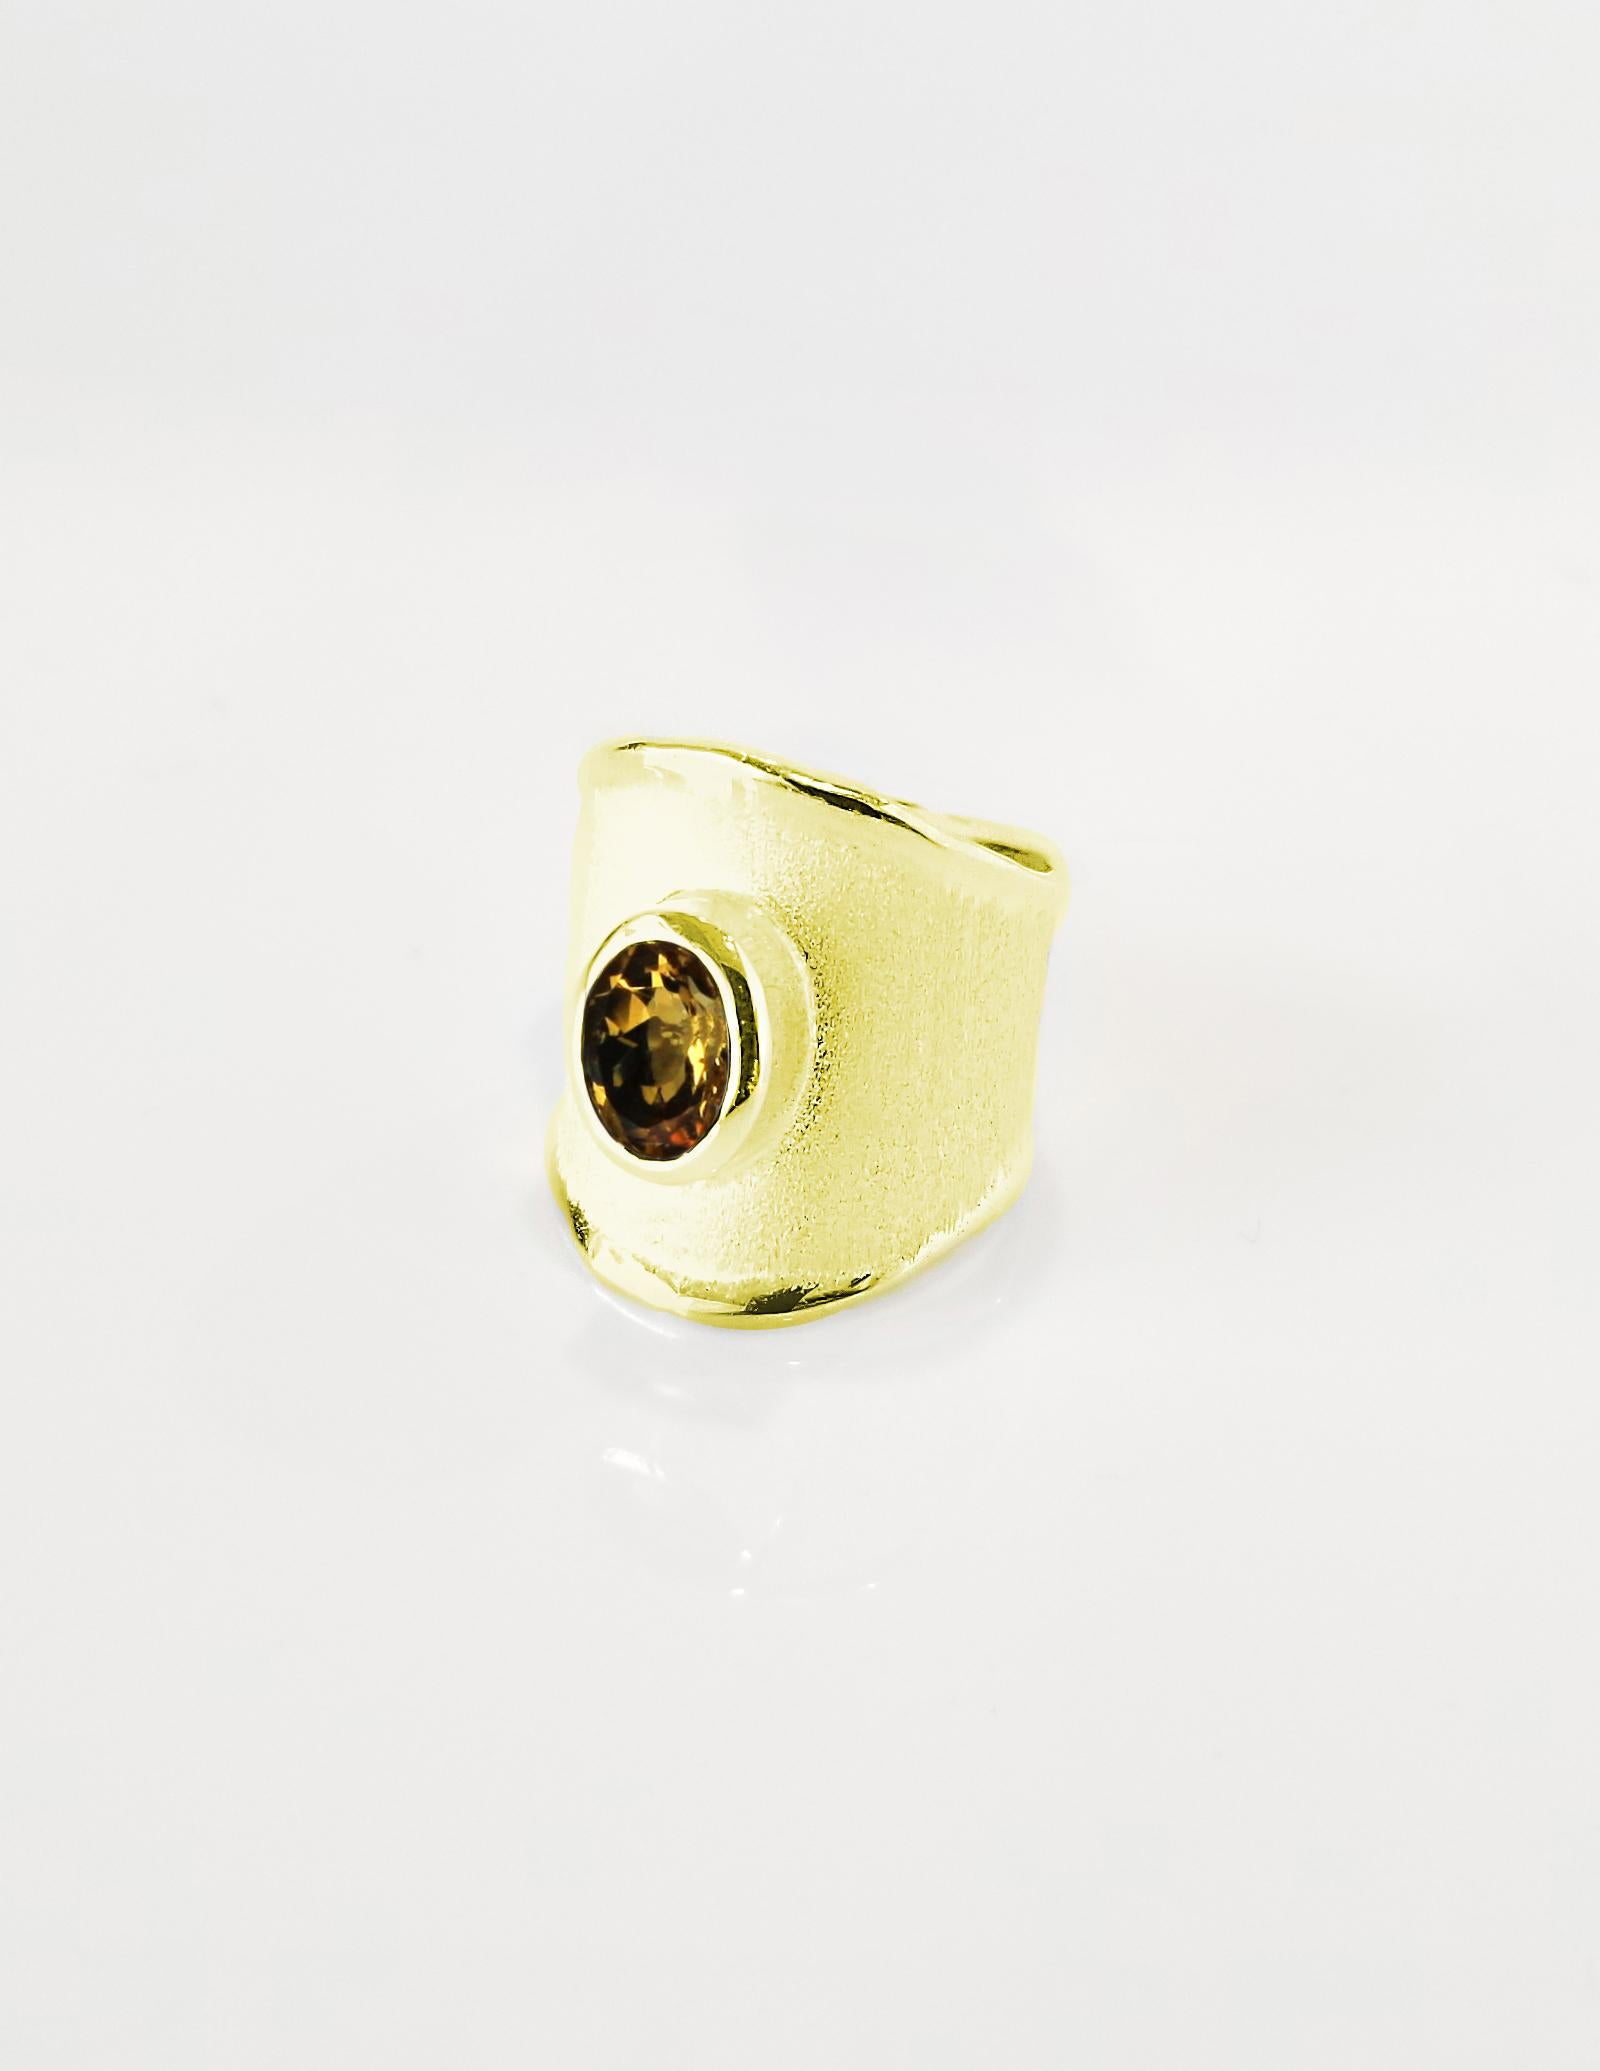 Presenting Yianni Creations ring all handcrafted in Greece from 18 Karat yellow gold. This gorgeous wide band ring features a 1.25 Carat oval cut Citrine and ancient techniques of workmanship that create a unique look. The beautiful design is also